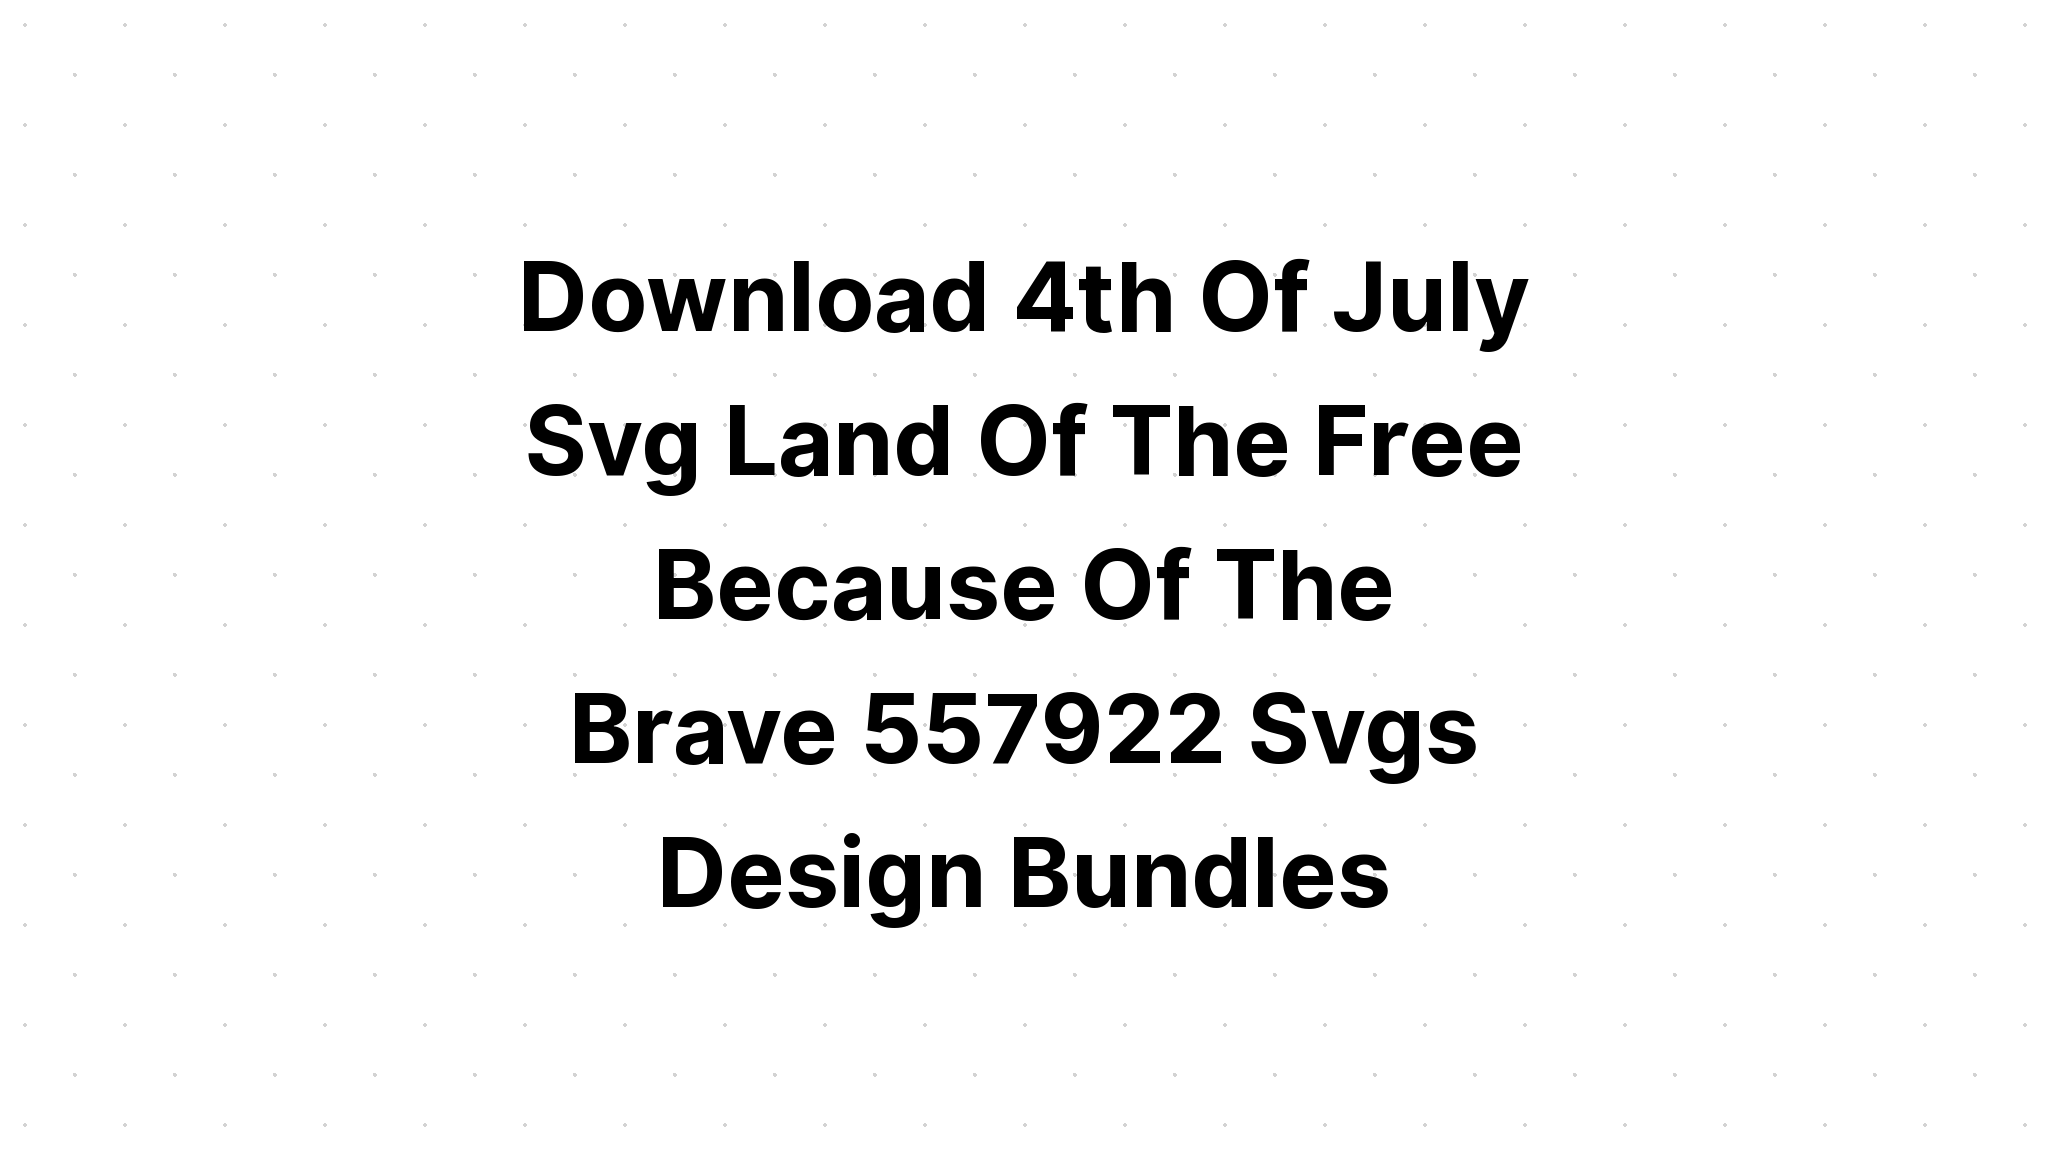 Download Land Of The Free Home Of The SVG File